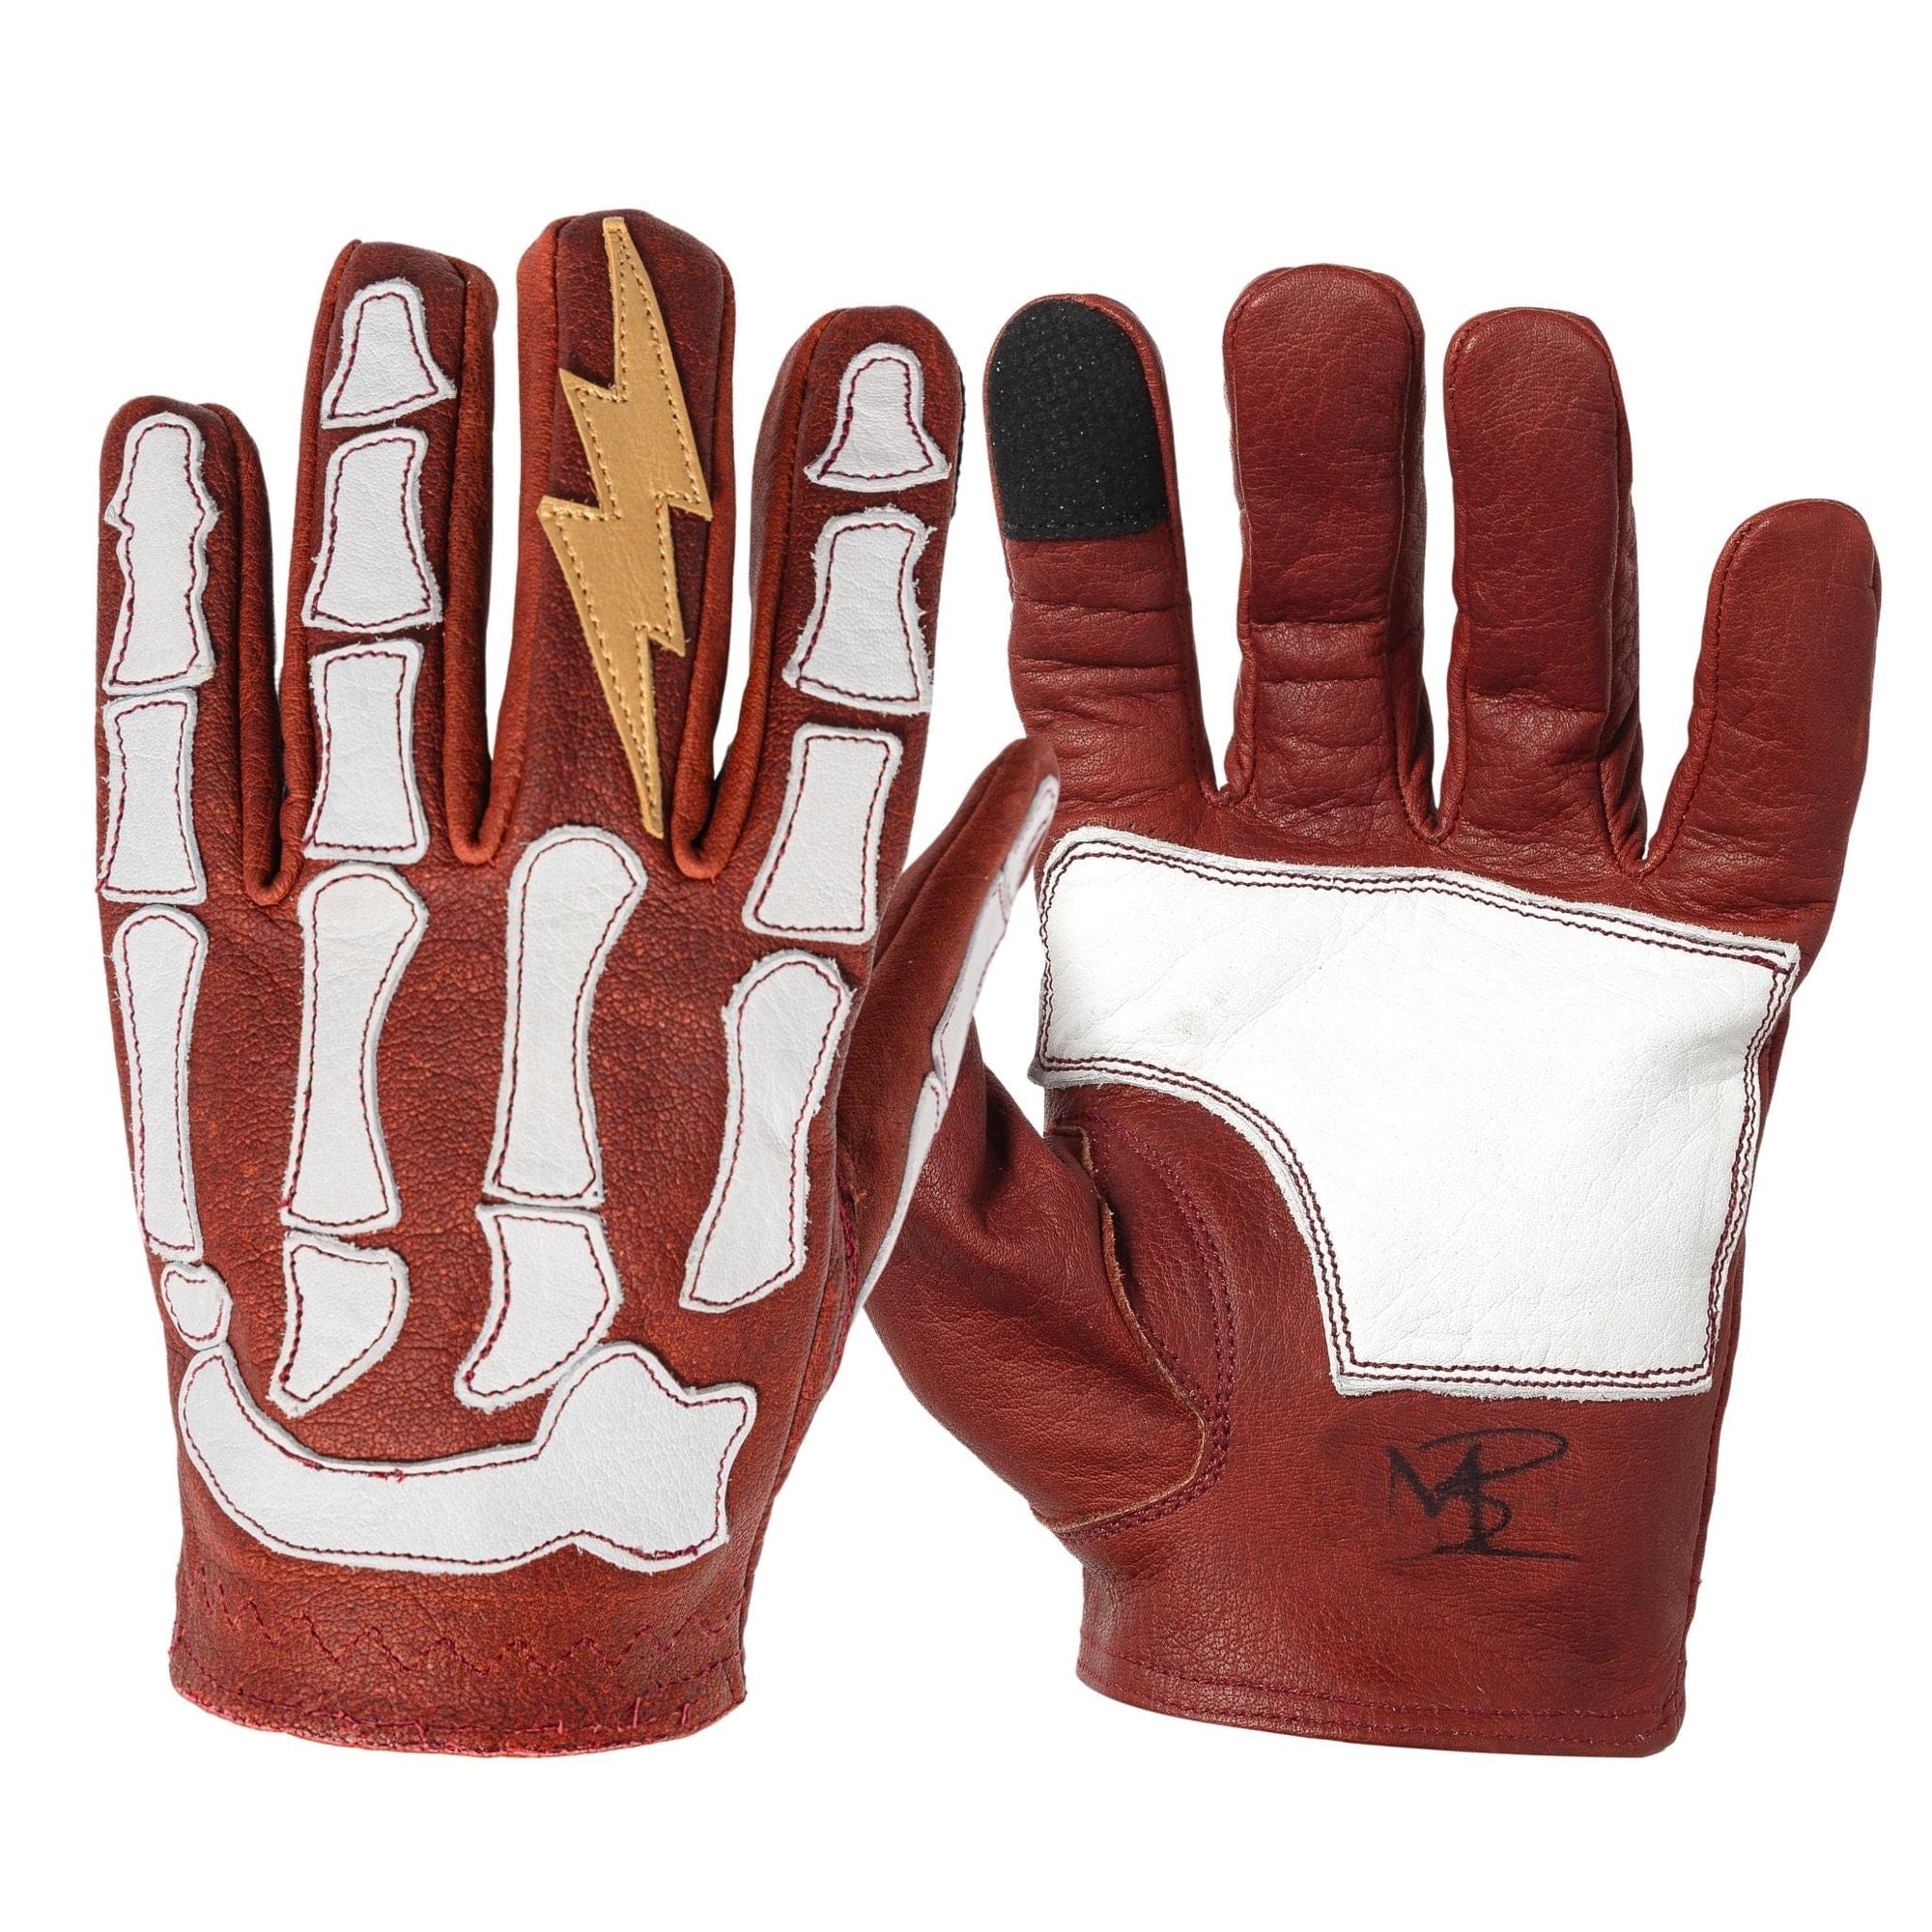 Maroon Bell Outdoor® Gloves XS Astrapí (Lightning) Skeleton Leather Motorcycle Glove - Red-White